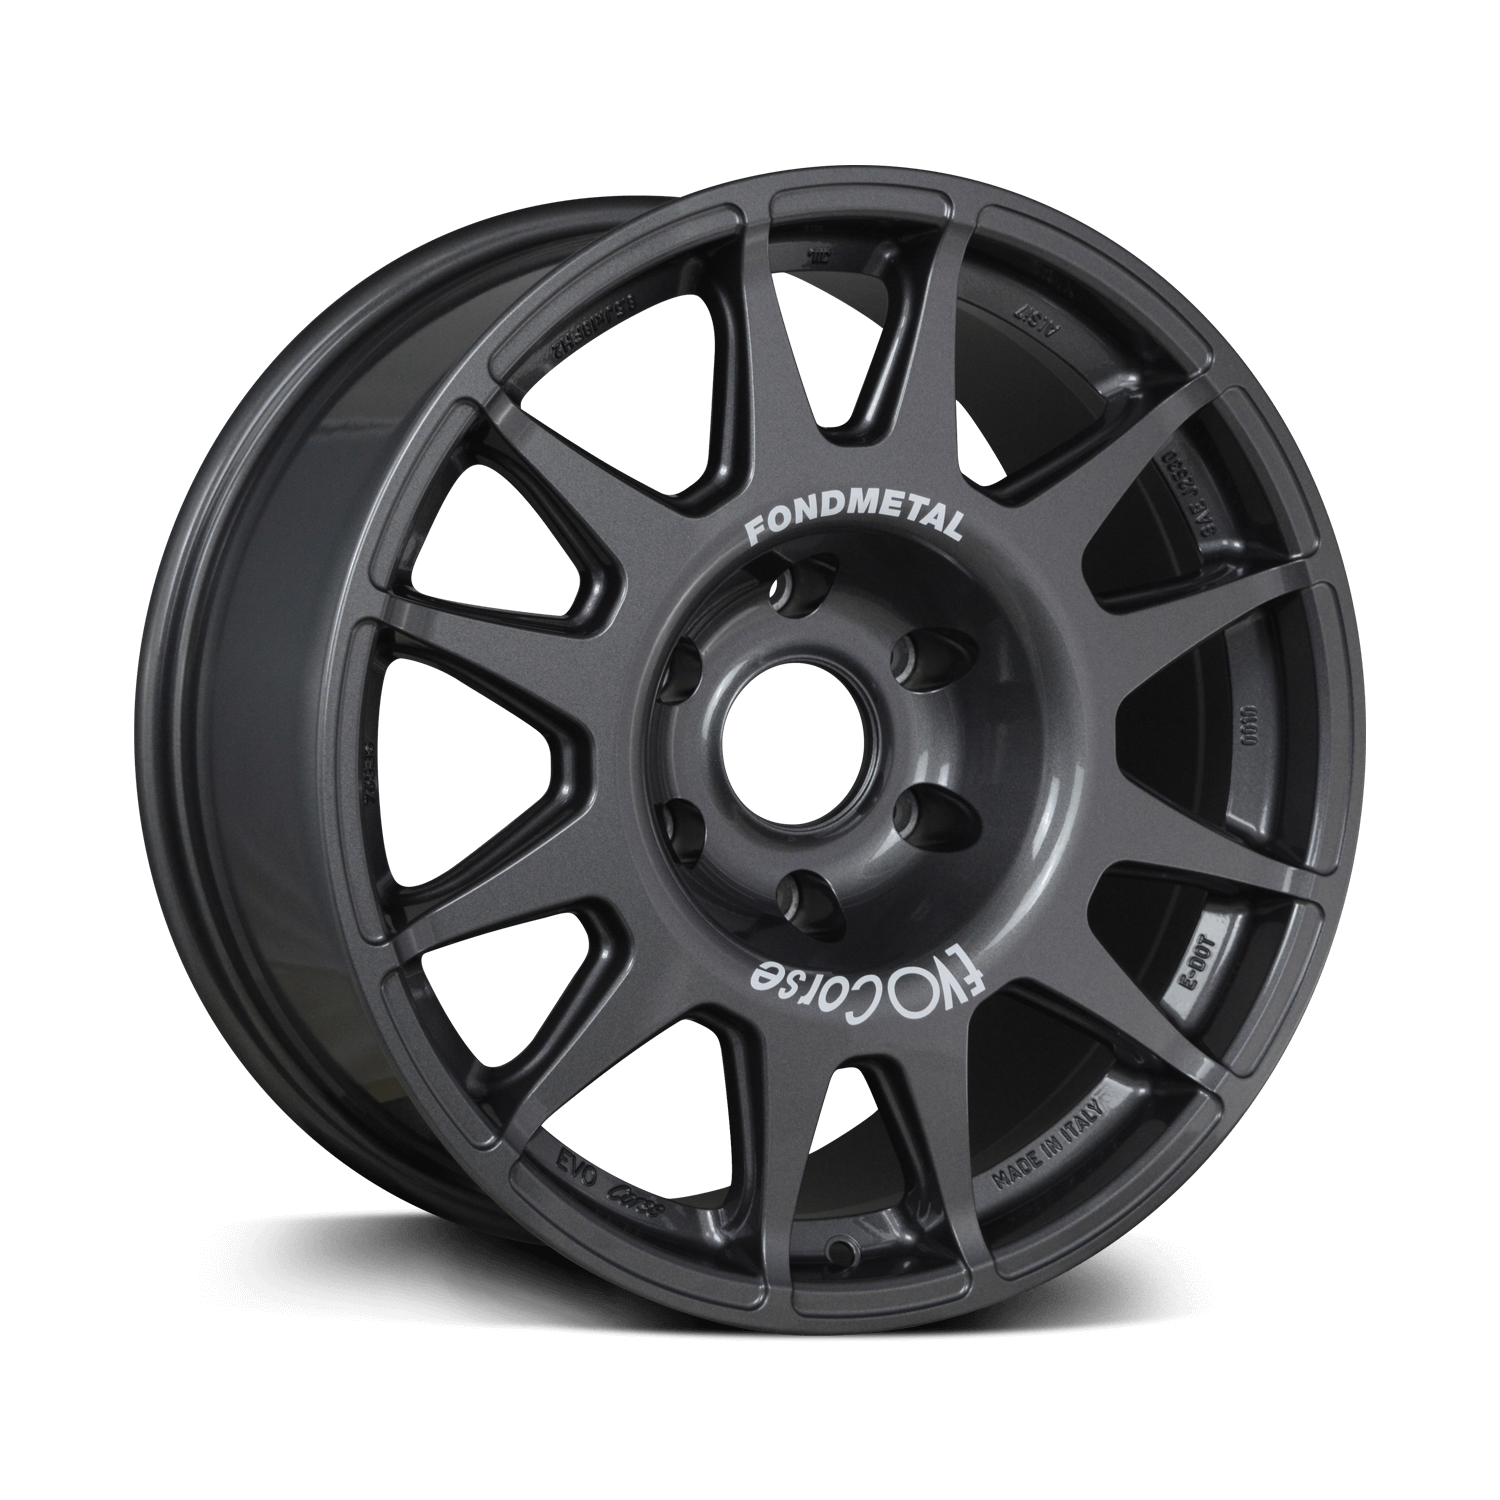 Evo Corse wheel axo view anthracite, for toyota land cruiser 300 series, anthracite. the 4x4 off road allow wheel with the highest high load rating for overlanding, rally, 4wd expedition use in australia. lc300 wheels, 300 series wheels, 300 series landcruiser wheels, what is the best offset for you land cruiser 300 wheels? This 18x8.5 ET47